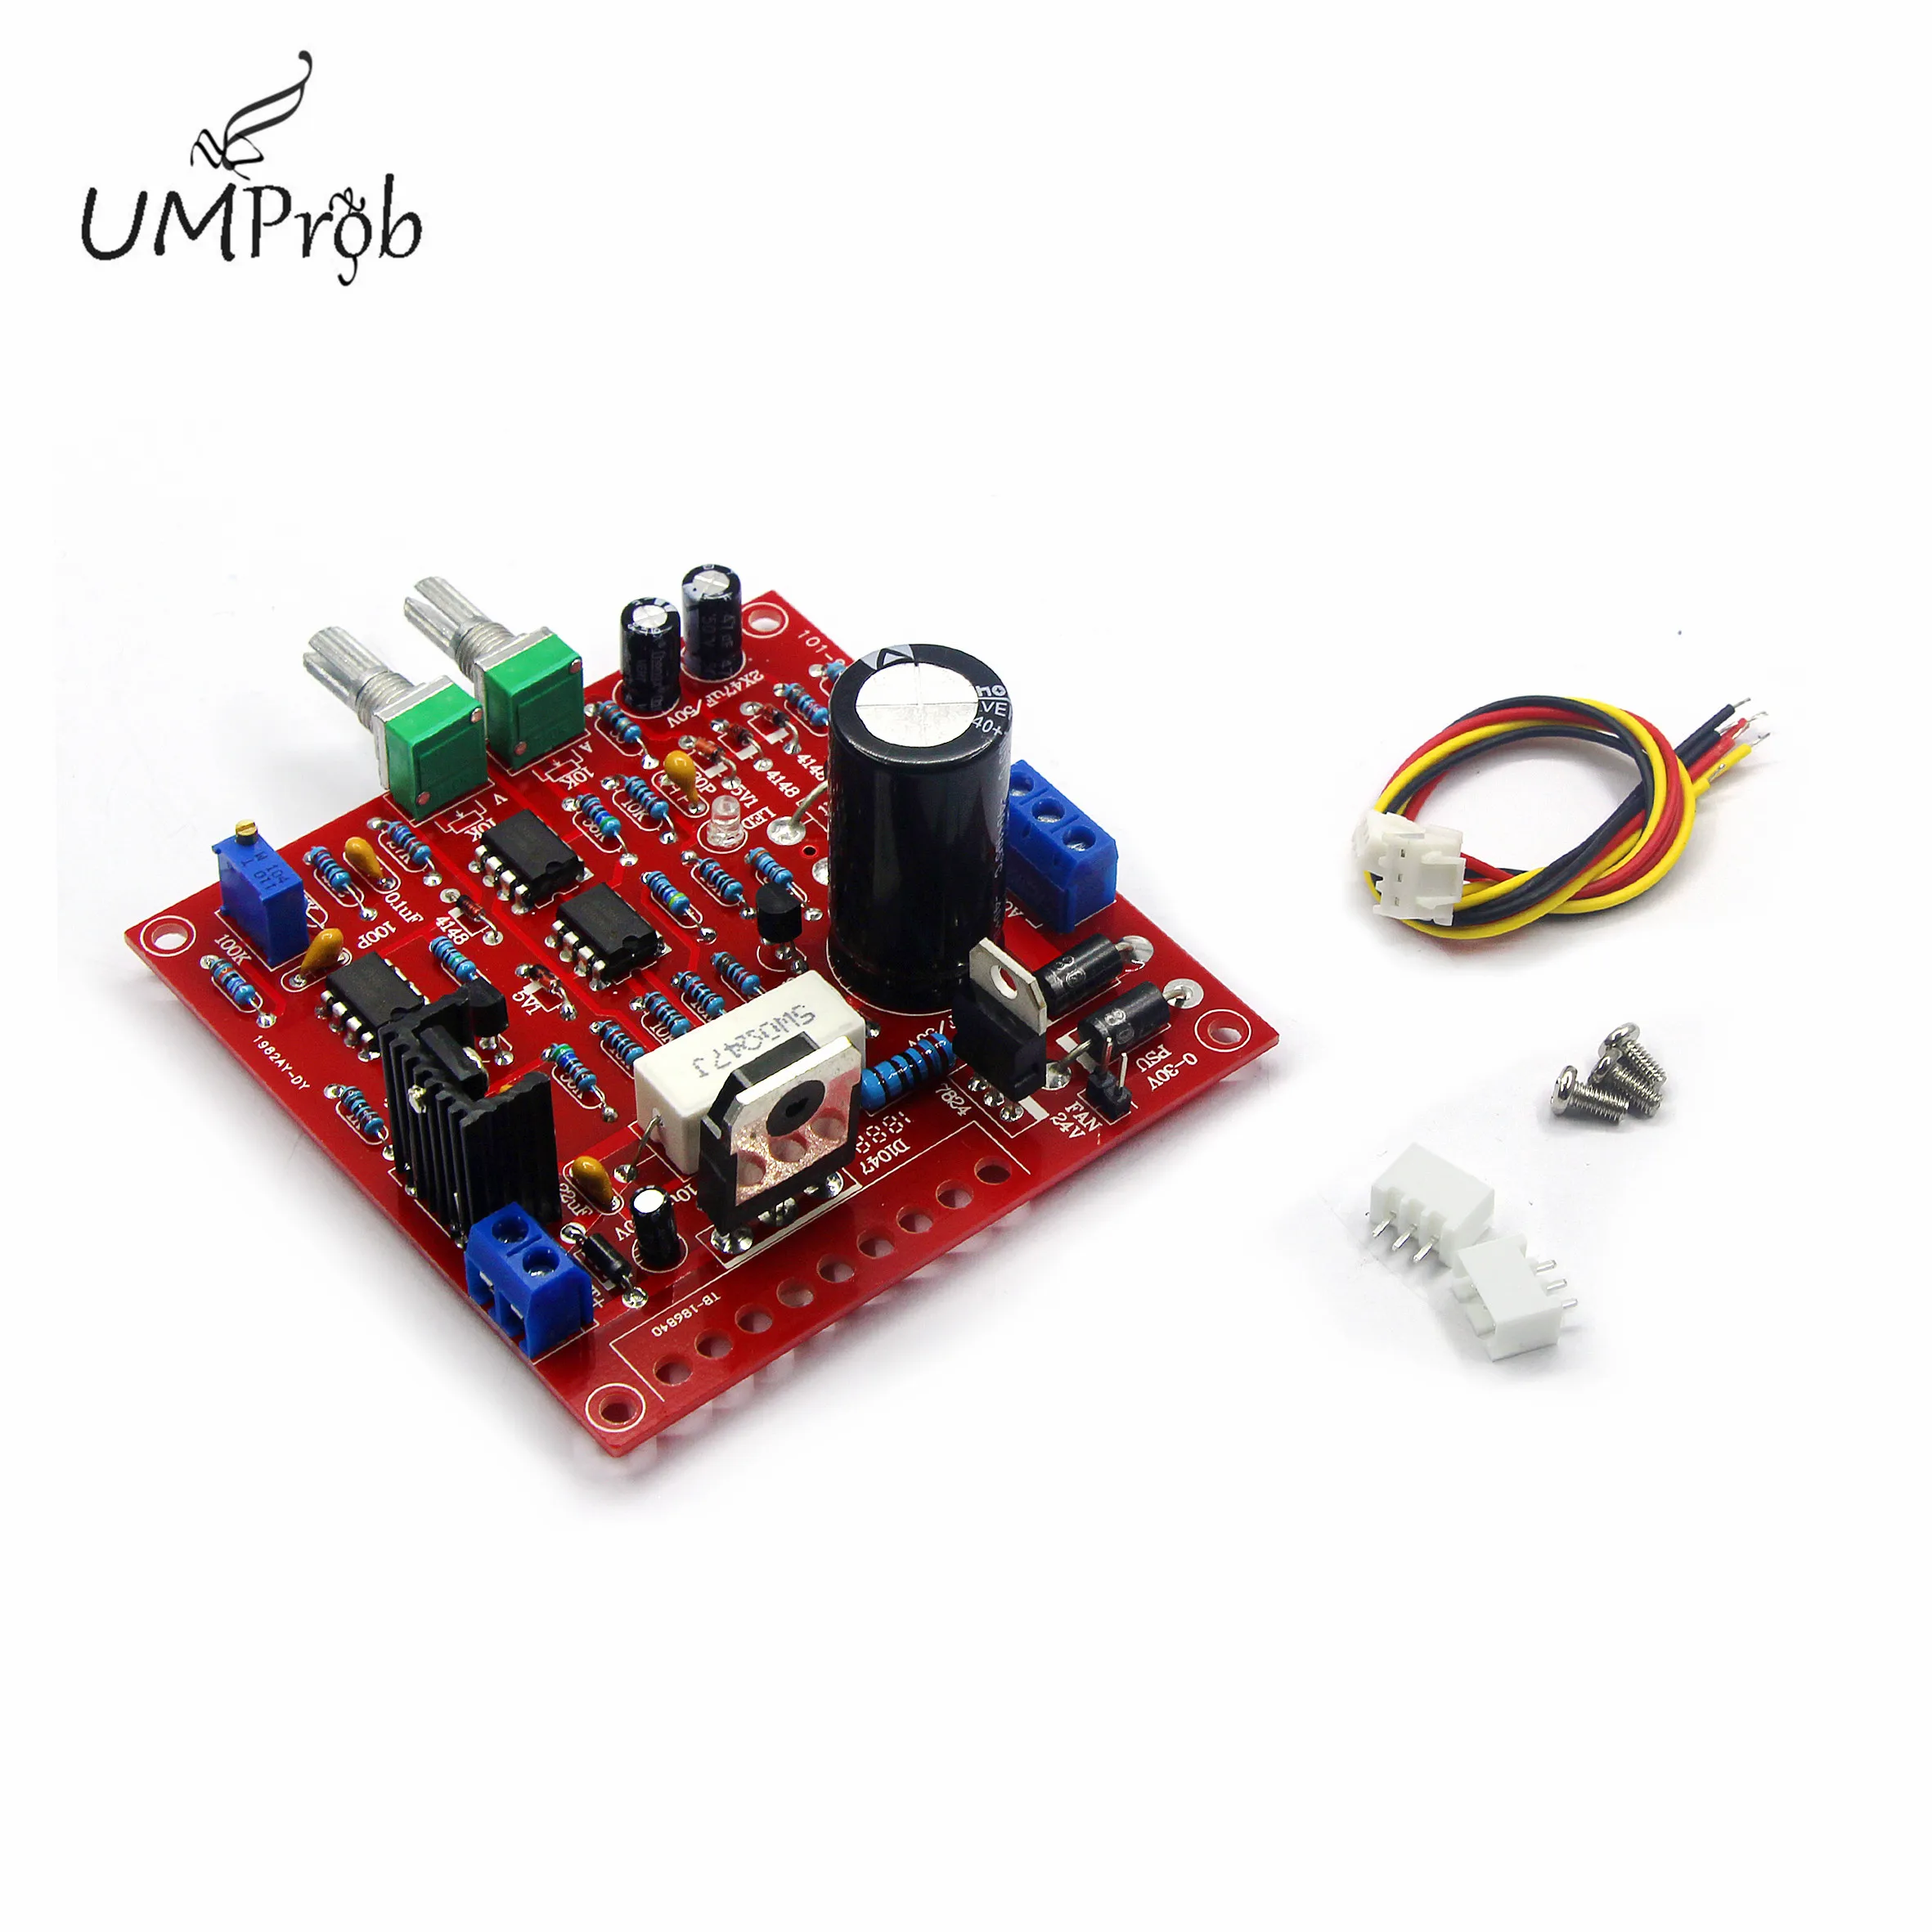 Red 0-30V 2mA-3A Continuously Adjustable DC Regulated Power Supply DIY Kit YJfi 